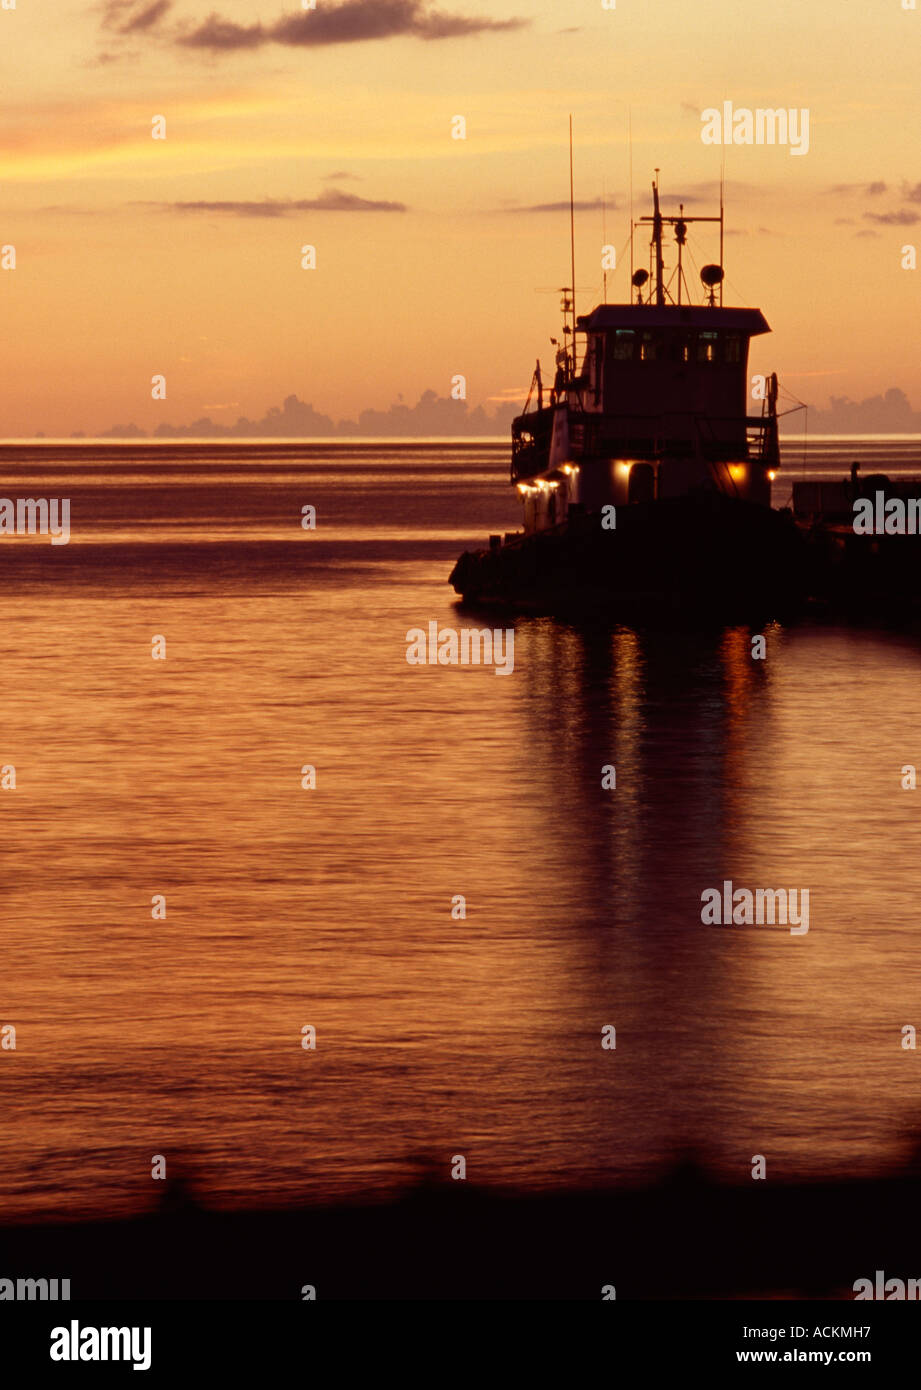 Grand Cayman Cayman Islands Georgetown Harbor tugboat in silhouette after sunset golden skies Stock Photo